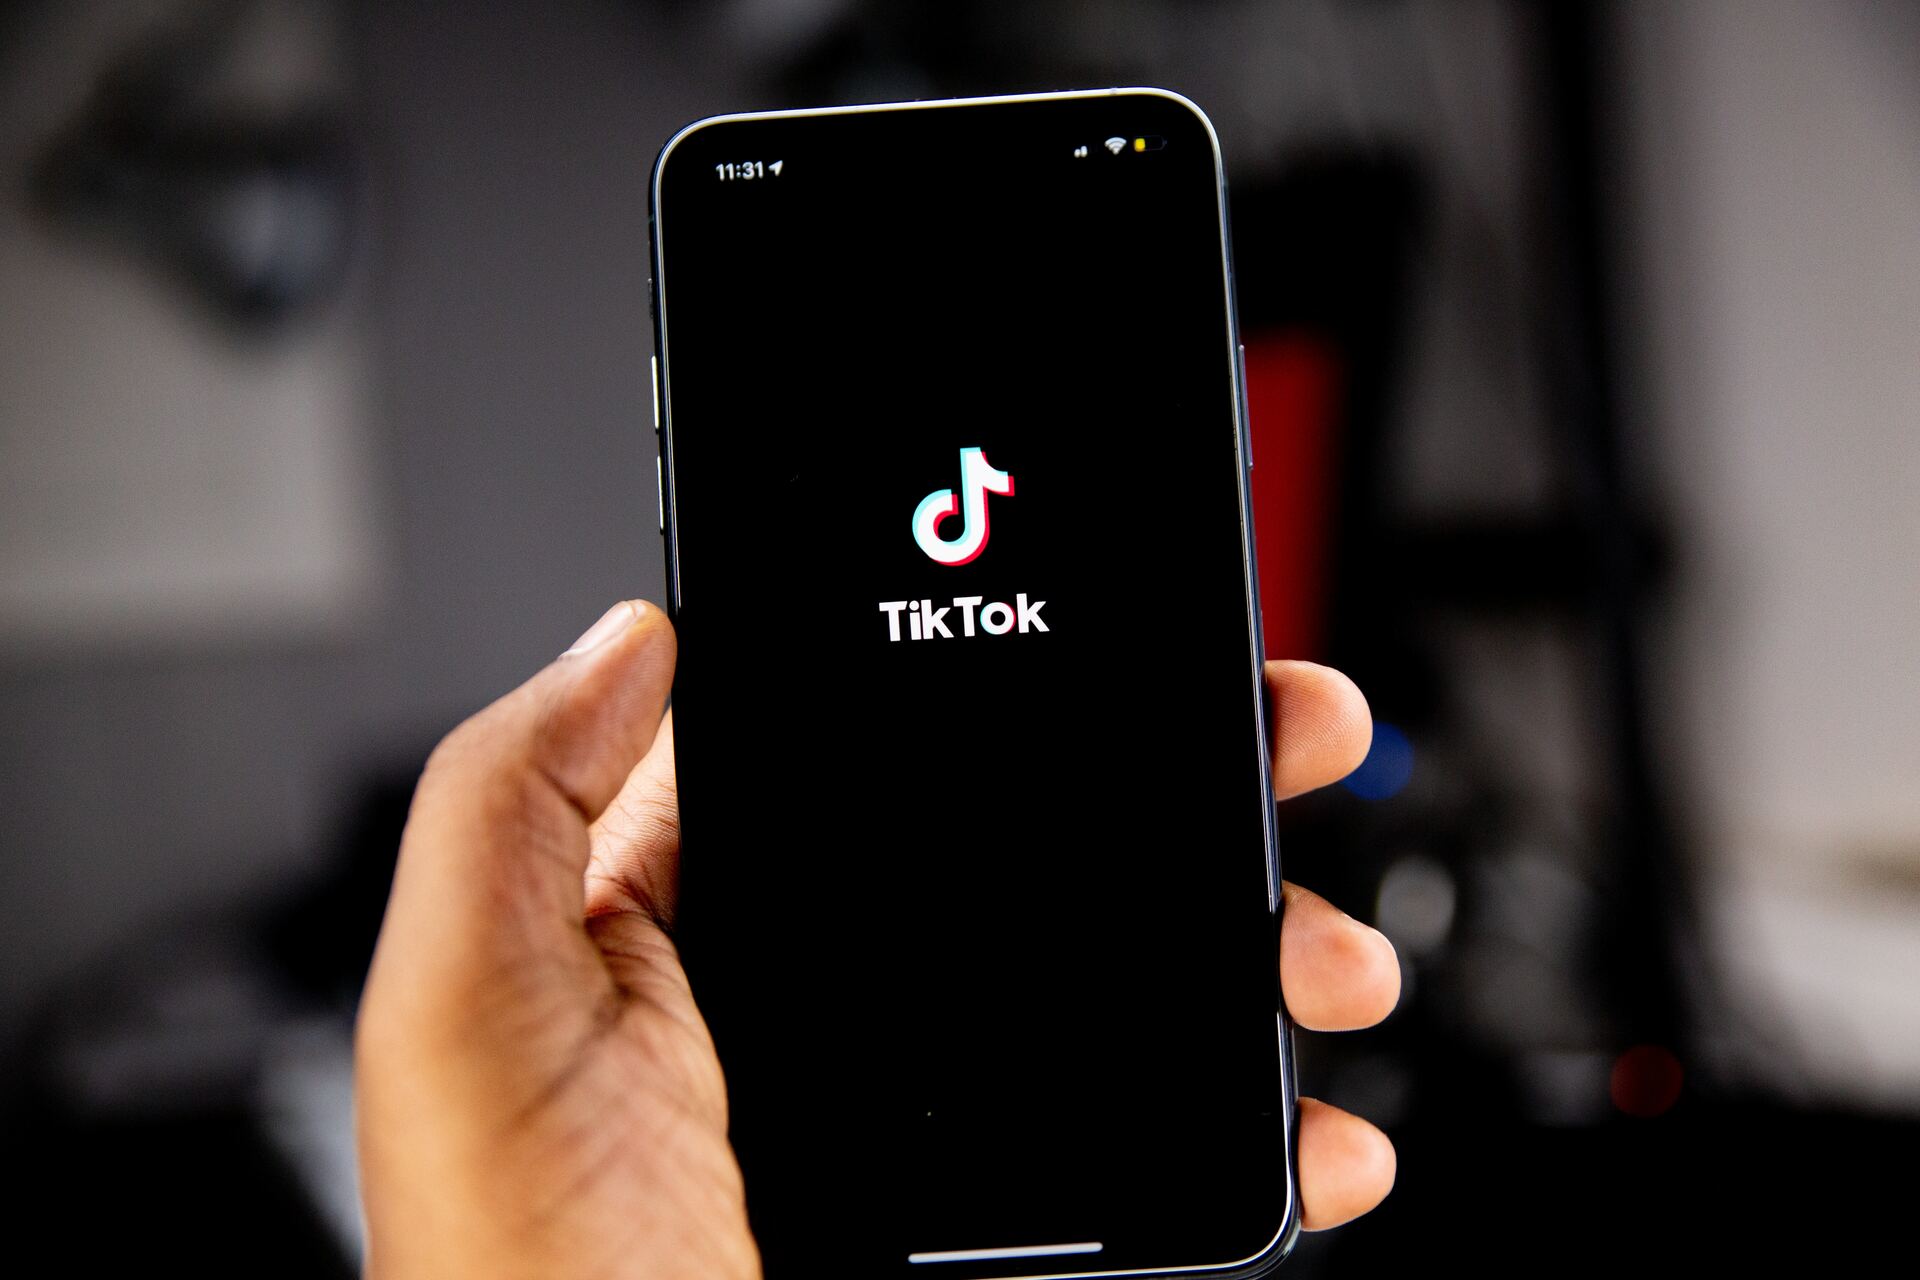 Switzerland chose not to sanction the use of TikTok on the phones of its public officials